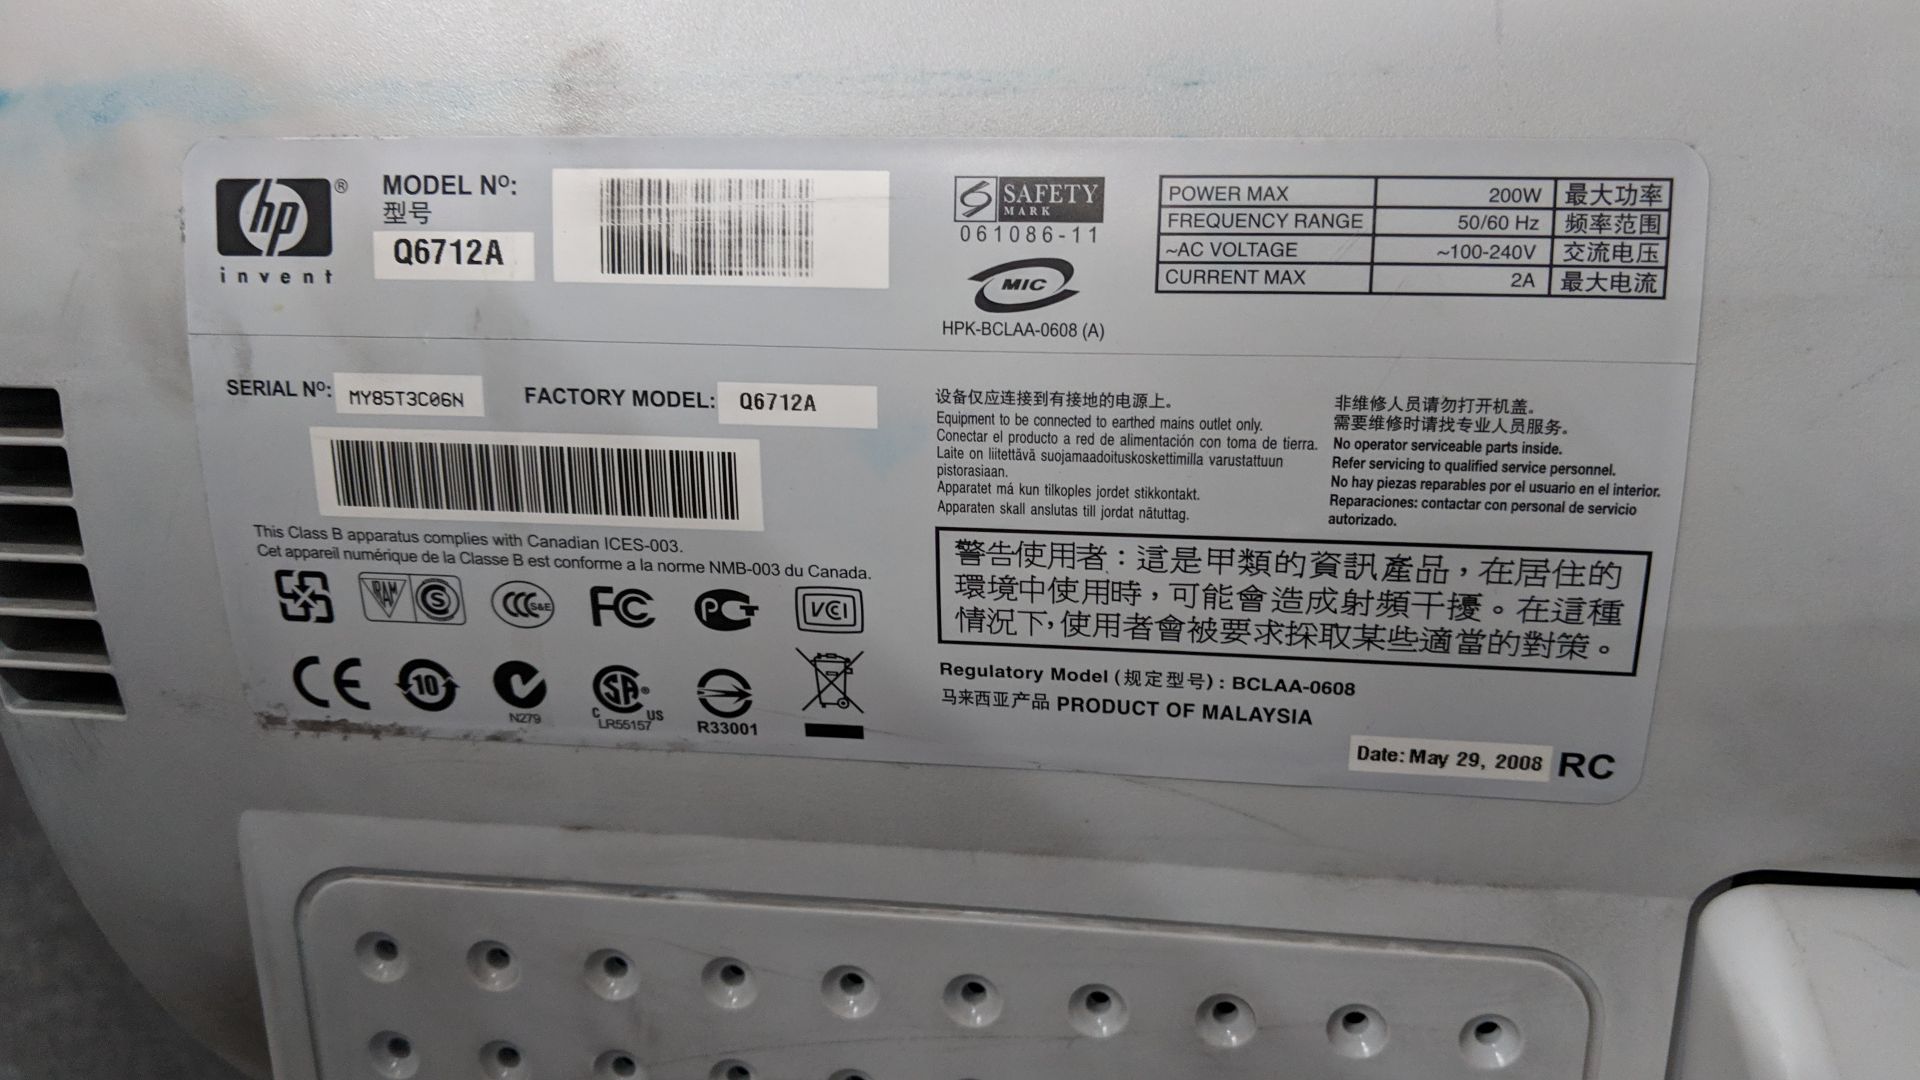 HP DesignJet T610 24" wide format printer, serial no. MY85T3C06N, factory model Q6712A IMPORTANT: - Image 8 of 9